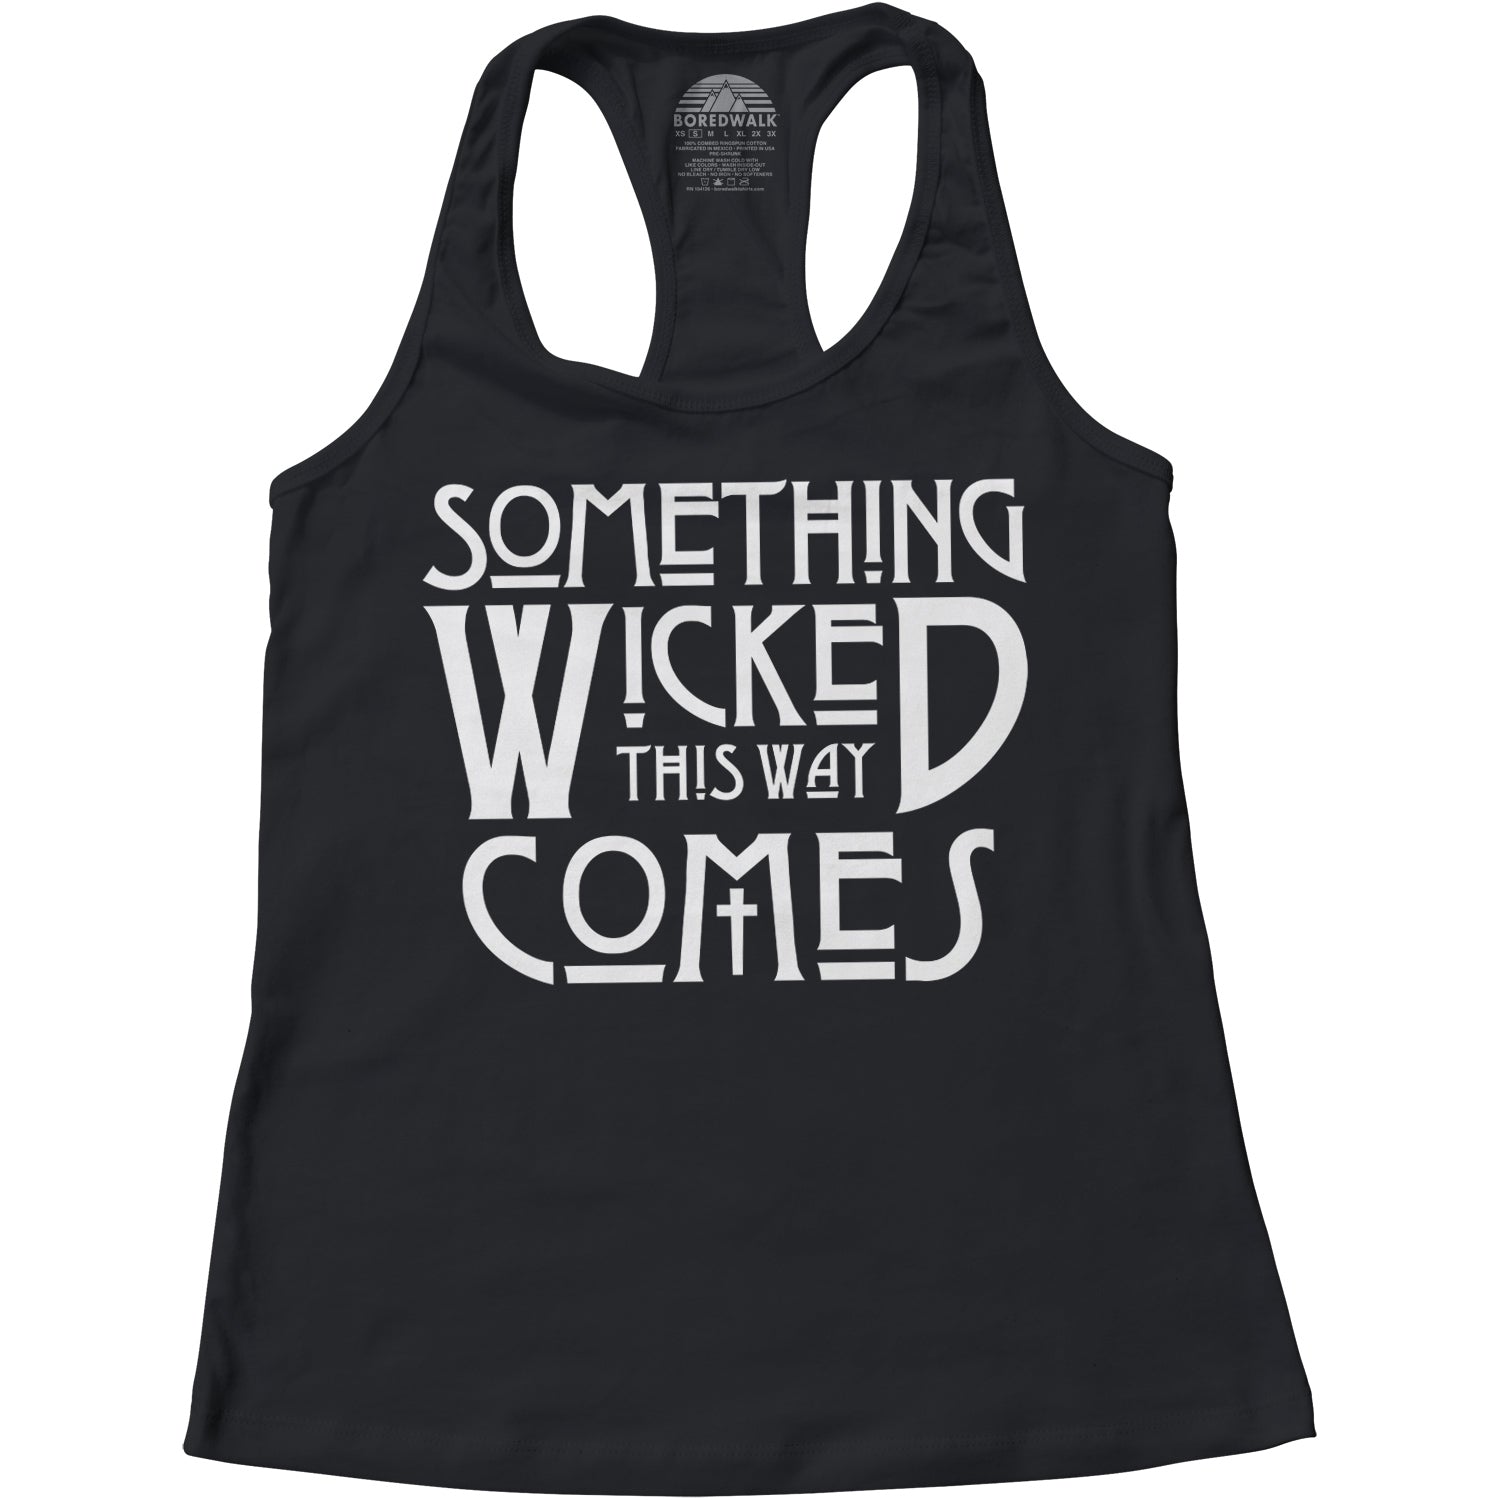 Women's Something Wicked This Way Comes Racerback Tank Top